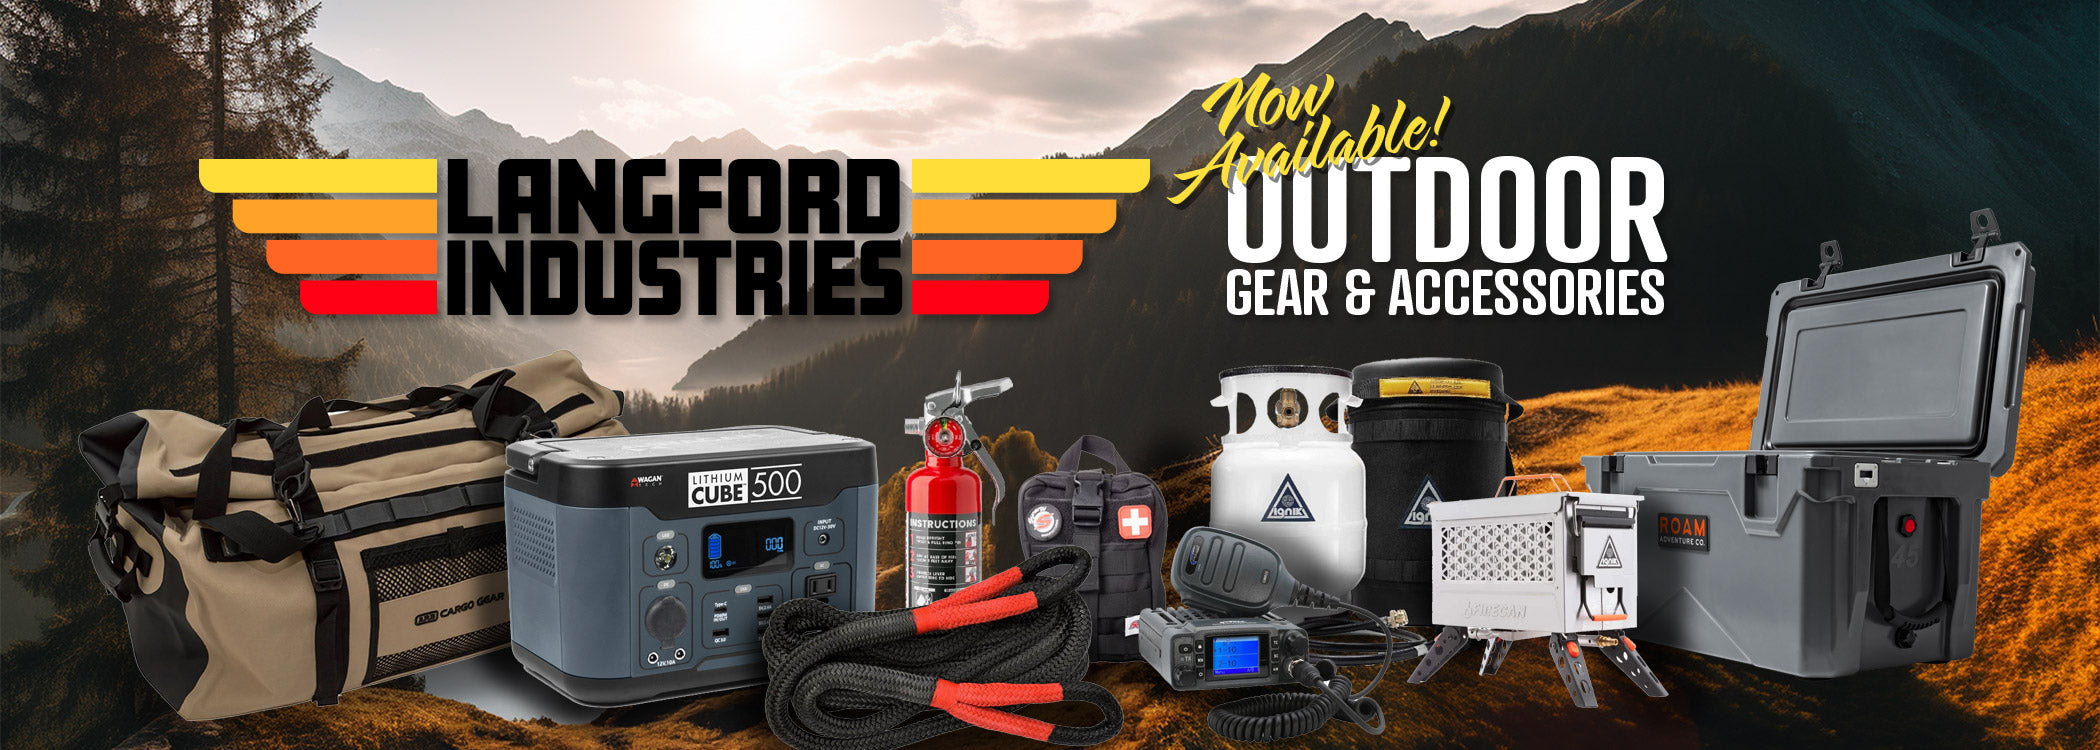 Check out what's new at Langford Industries!